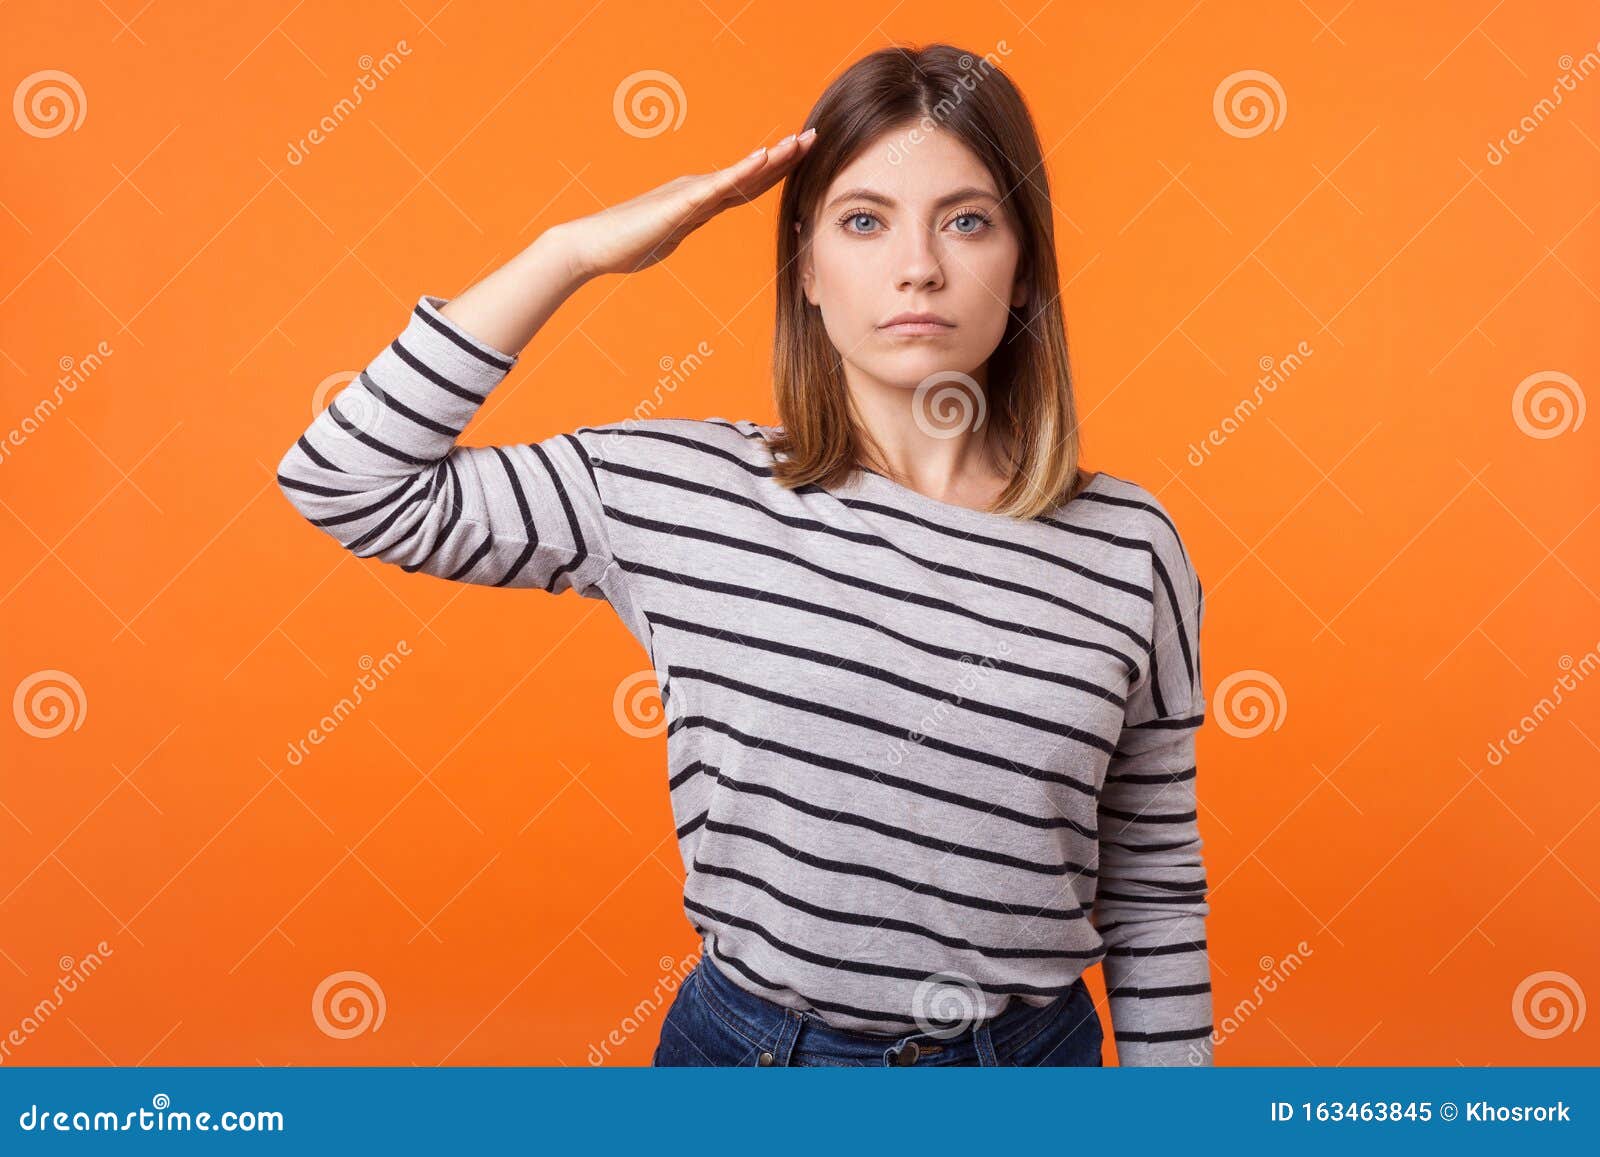 Yes Sir! Portrait of Obedient Serious Young Woman with Brown Hair in Long  Sleeve Striped Shirt. Indoor Studio Shot Isolated on Stock Image - Image of  face, adult: 163463845